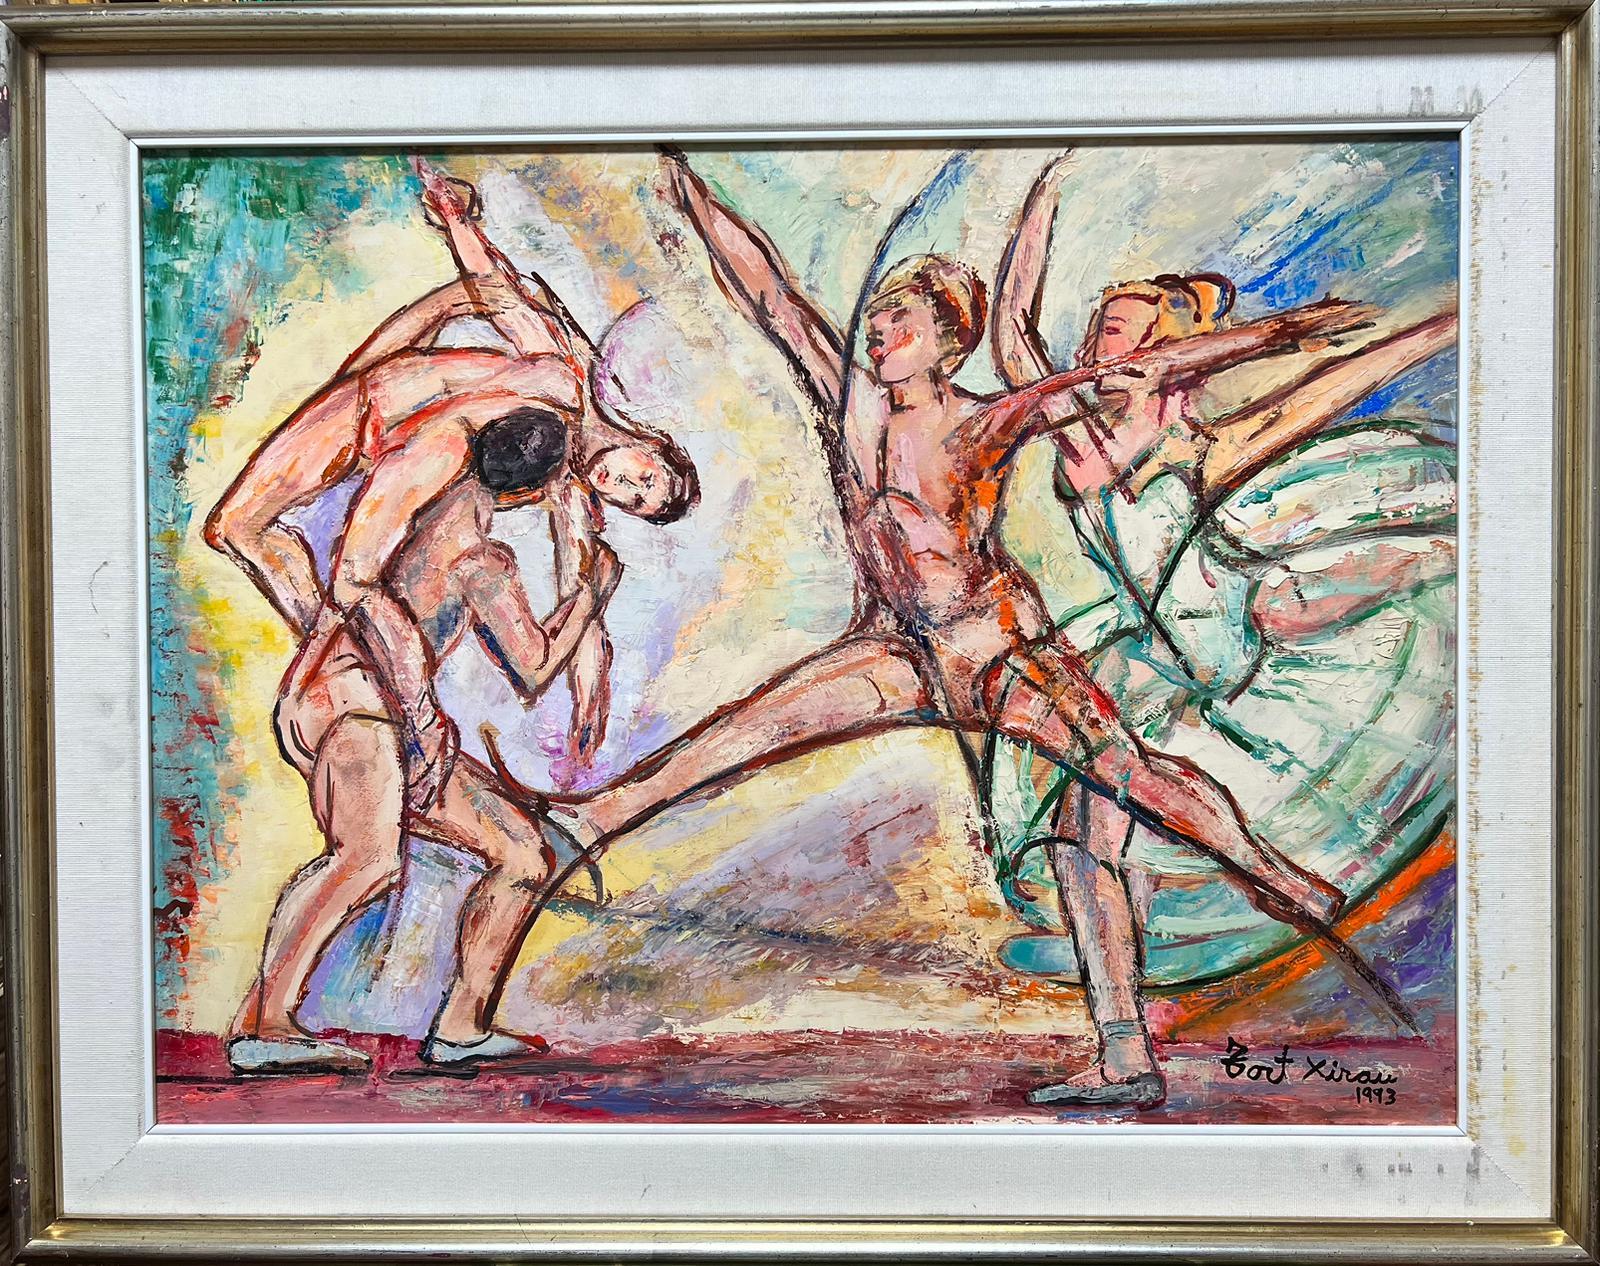 The Ballerinas
by Maria Tort Xirau (Catalan, 1924-2018)
signed lower corner
dated 1993
oil painting on board, framed

framed: 24 x 30.5 inches
board: 20 x 26 inches

Very good condition. 

Provenance: private collection

Maria Tort Xirau ( Figueres